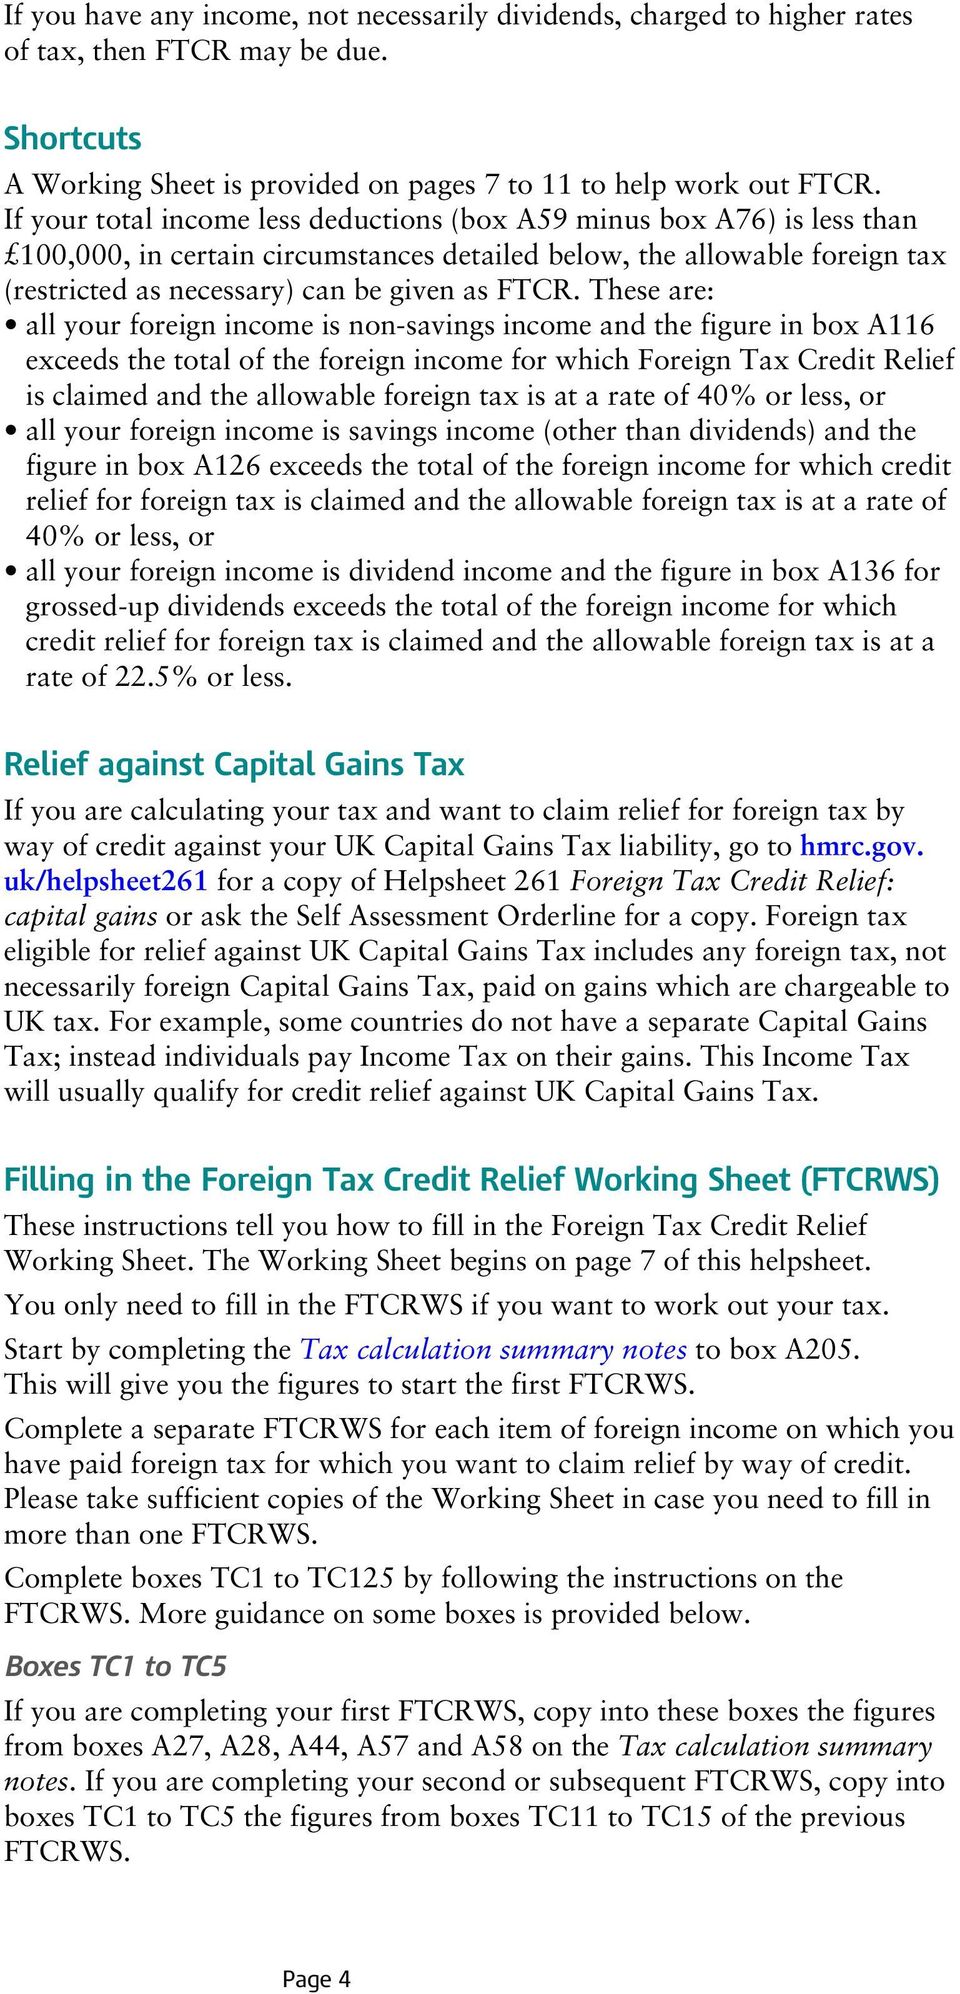 These are: all your foreign income is non-savings income and the figure in box A116 exceeds the total of the foreign income for which Foreign Tax Credit Relief is claimed and the allowable foreign